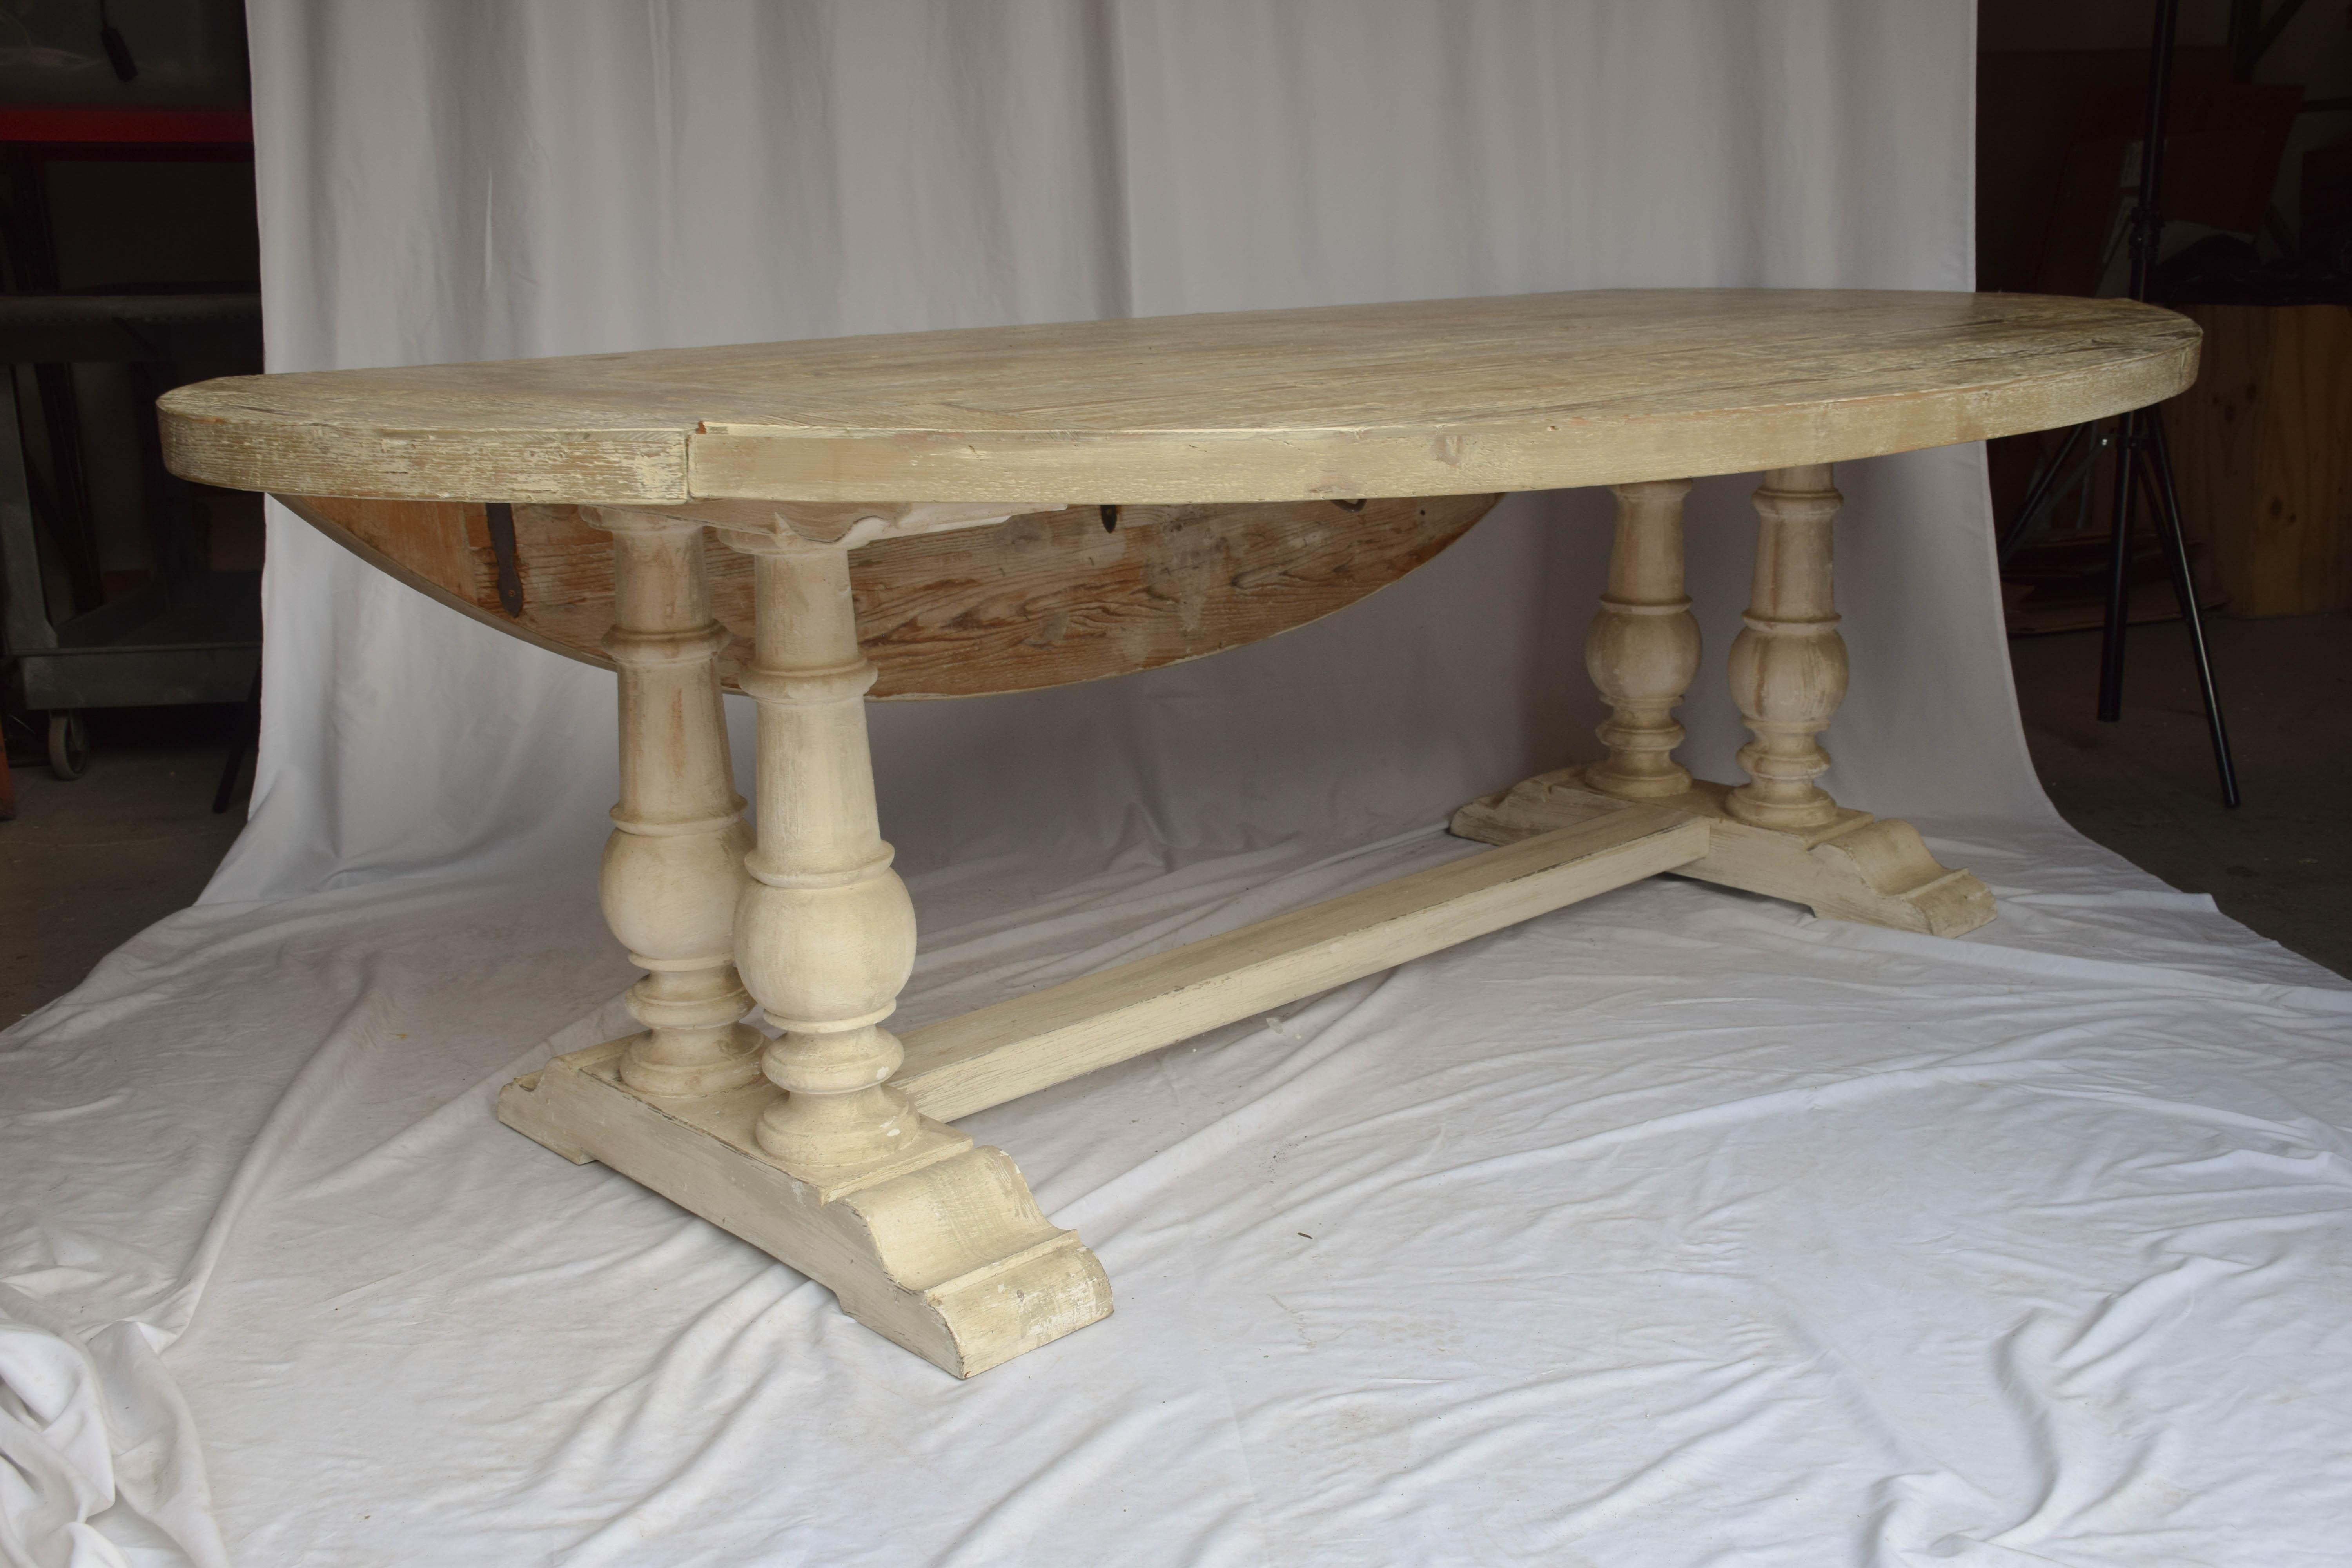 This versatile drop leaf table, is presented as found from Italy. Because of its grand size, it would be a wonderful dining table or entry table in a large space.